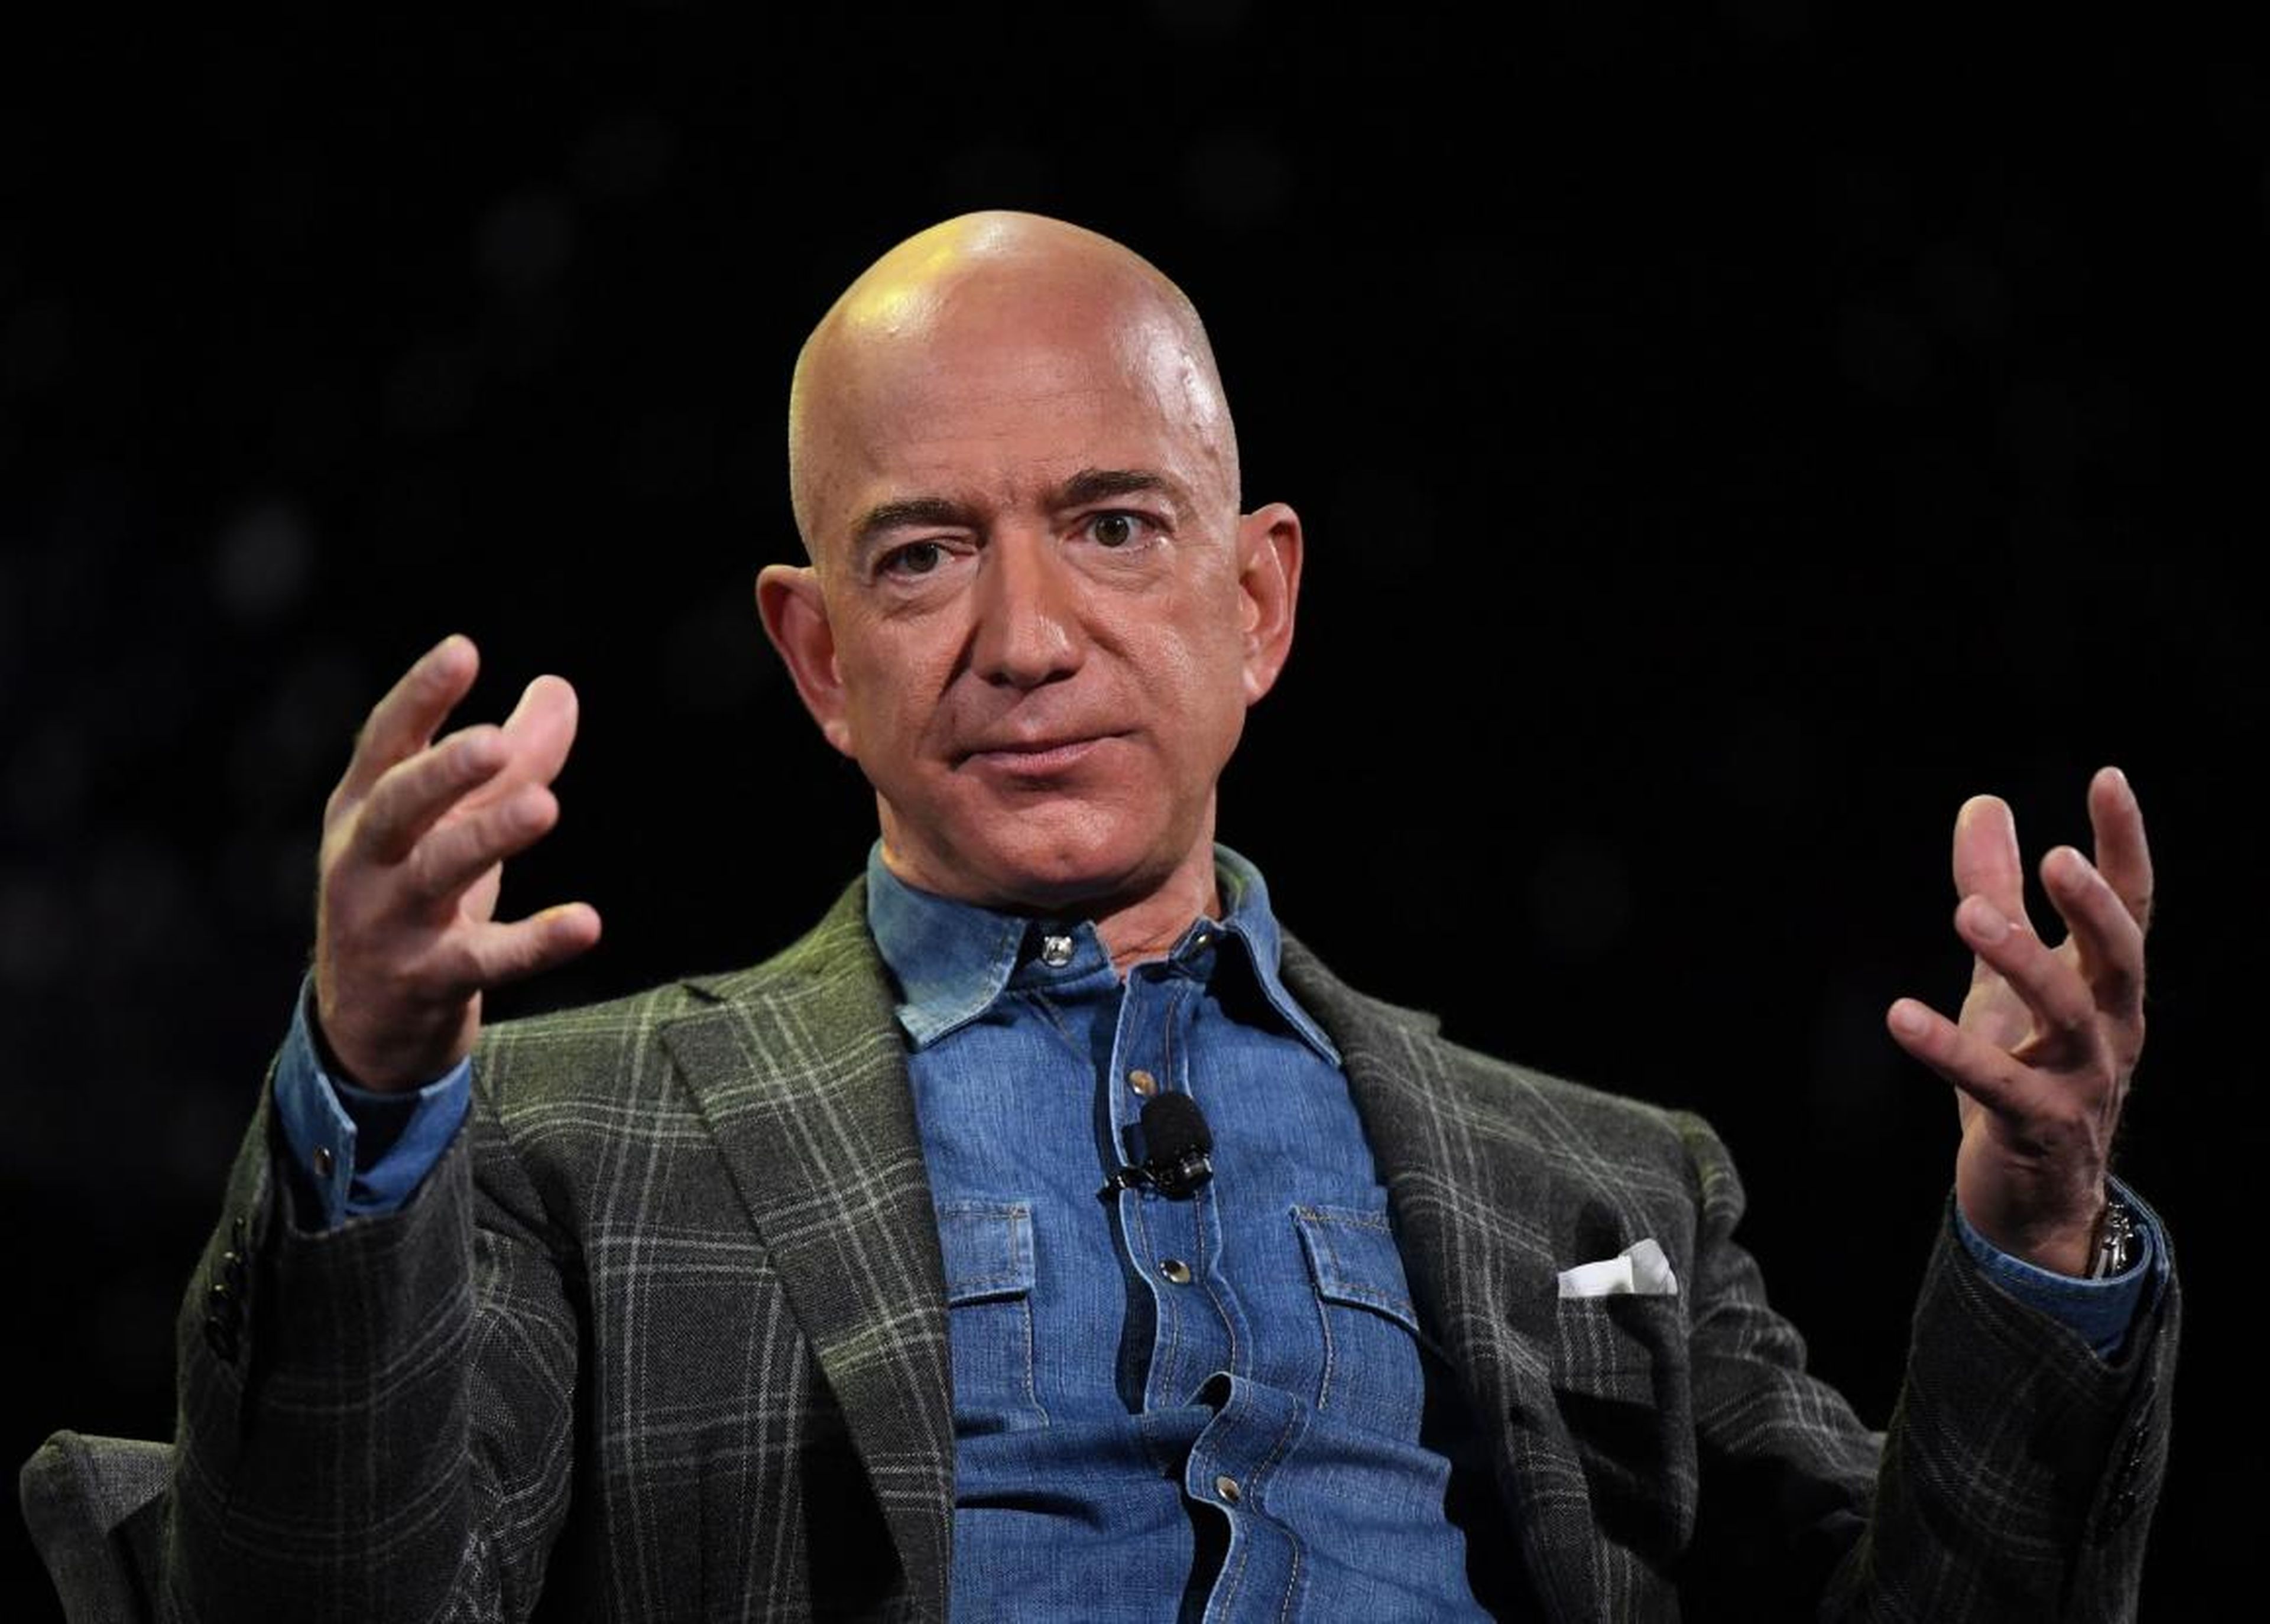 Wall Street is expecting Jeff Bezos and Amazon to once again report strong earnings results on Thursday.